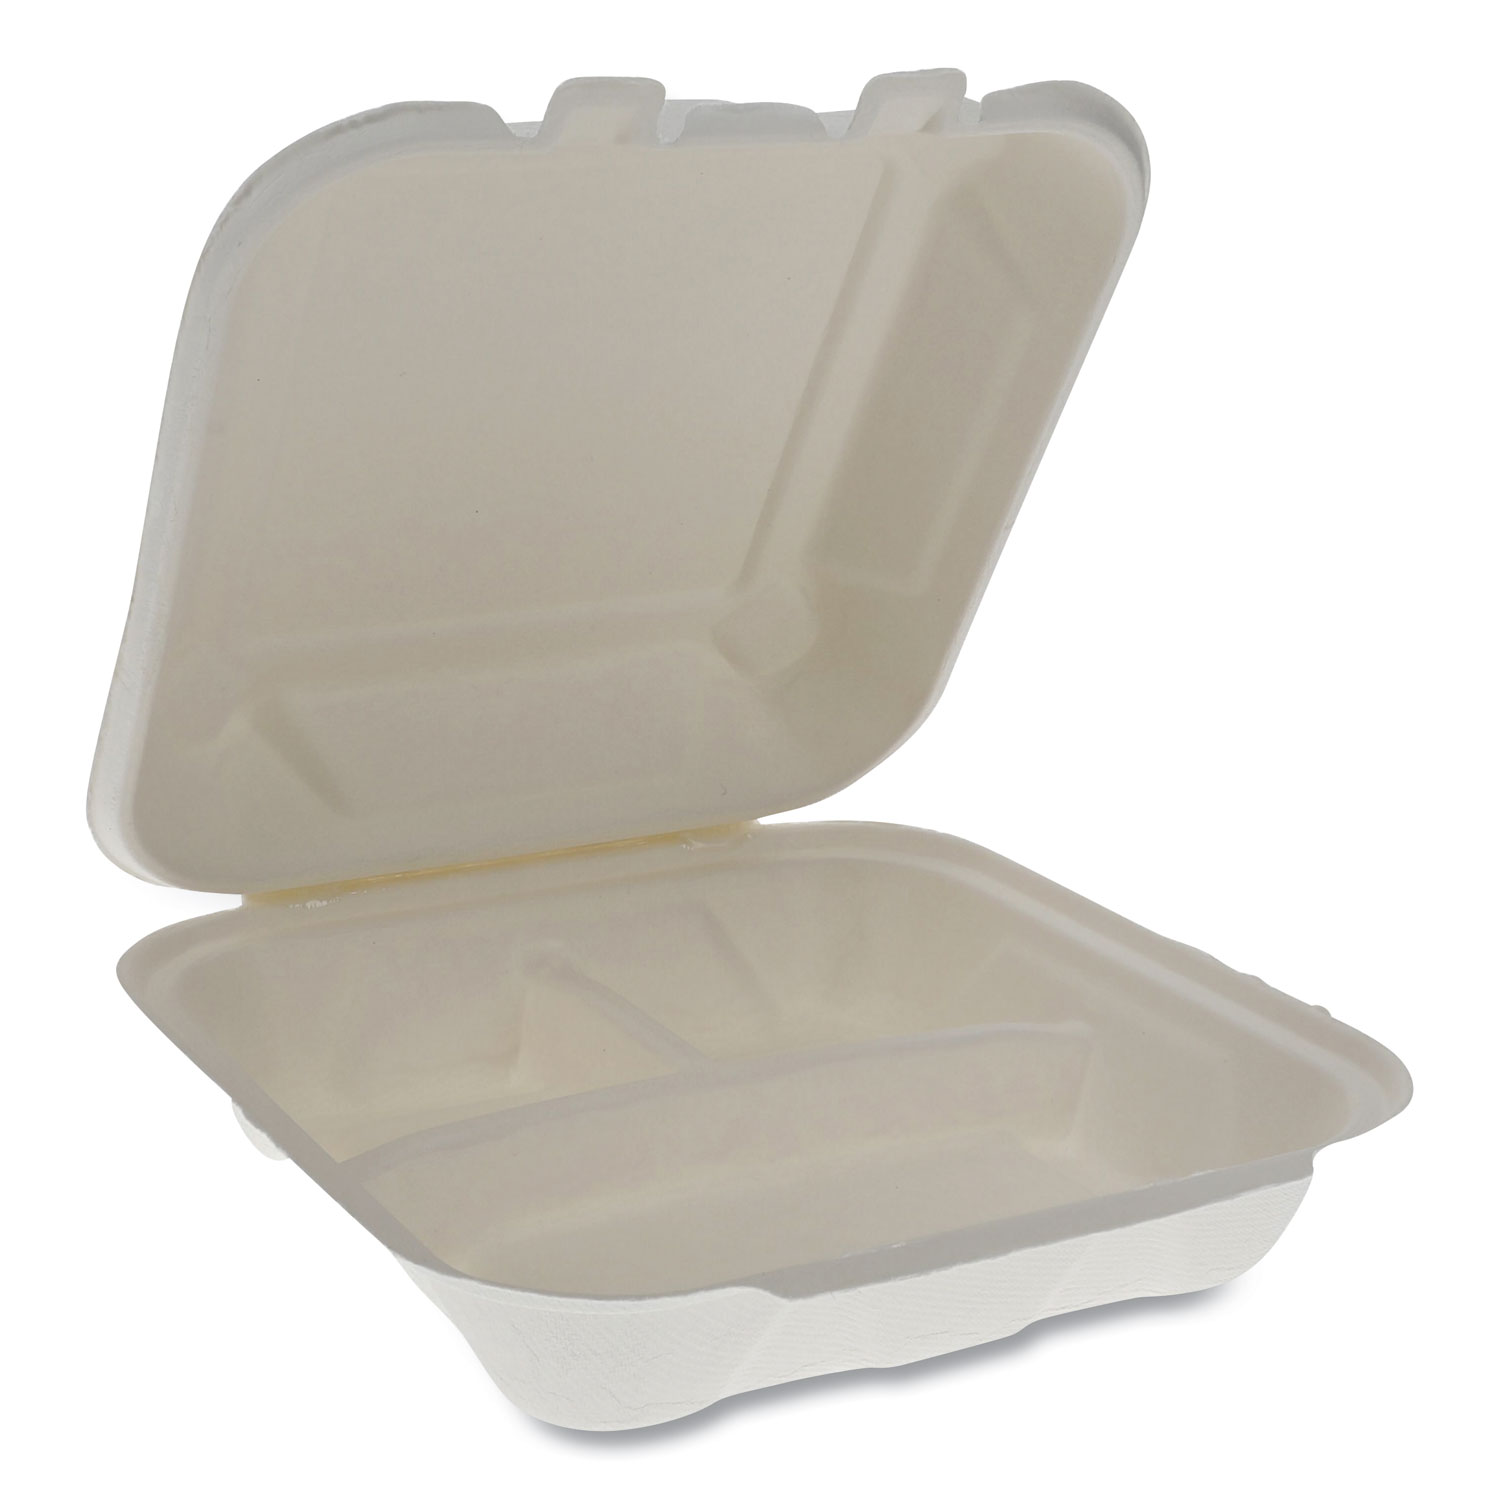  Pactiv YMCH08030001 EarthChoice Bagasse Hinged Lid Container, 7.8 x 7.8 x 2.8, 3-Compartment, Natural, 150/Carton (PCTYMCH08030001) 